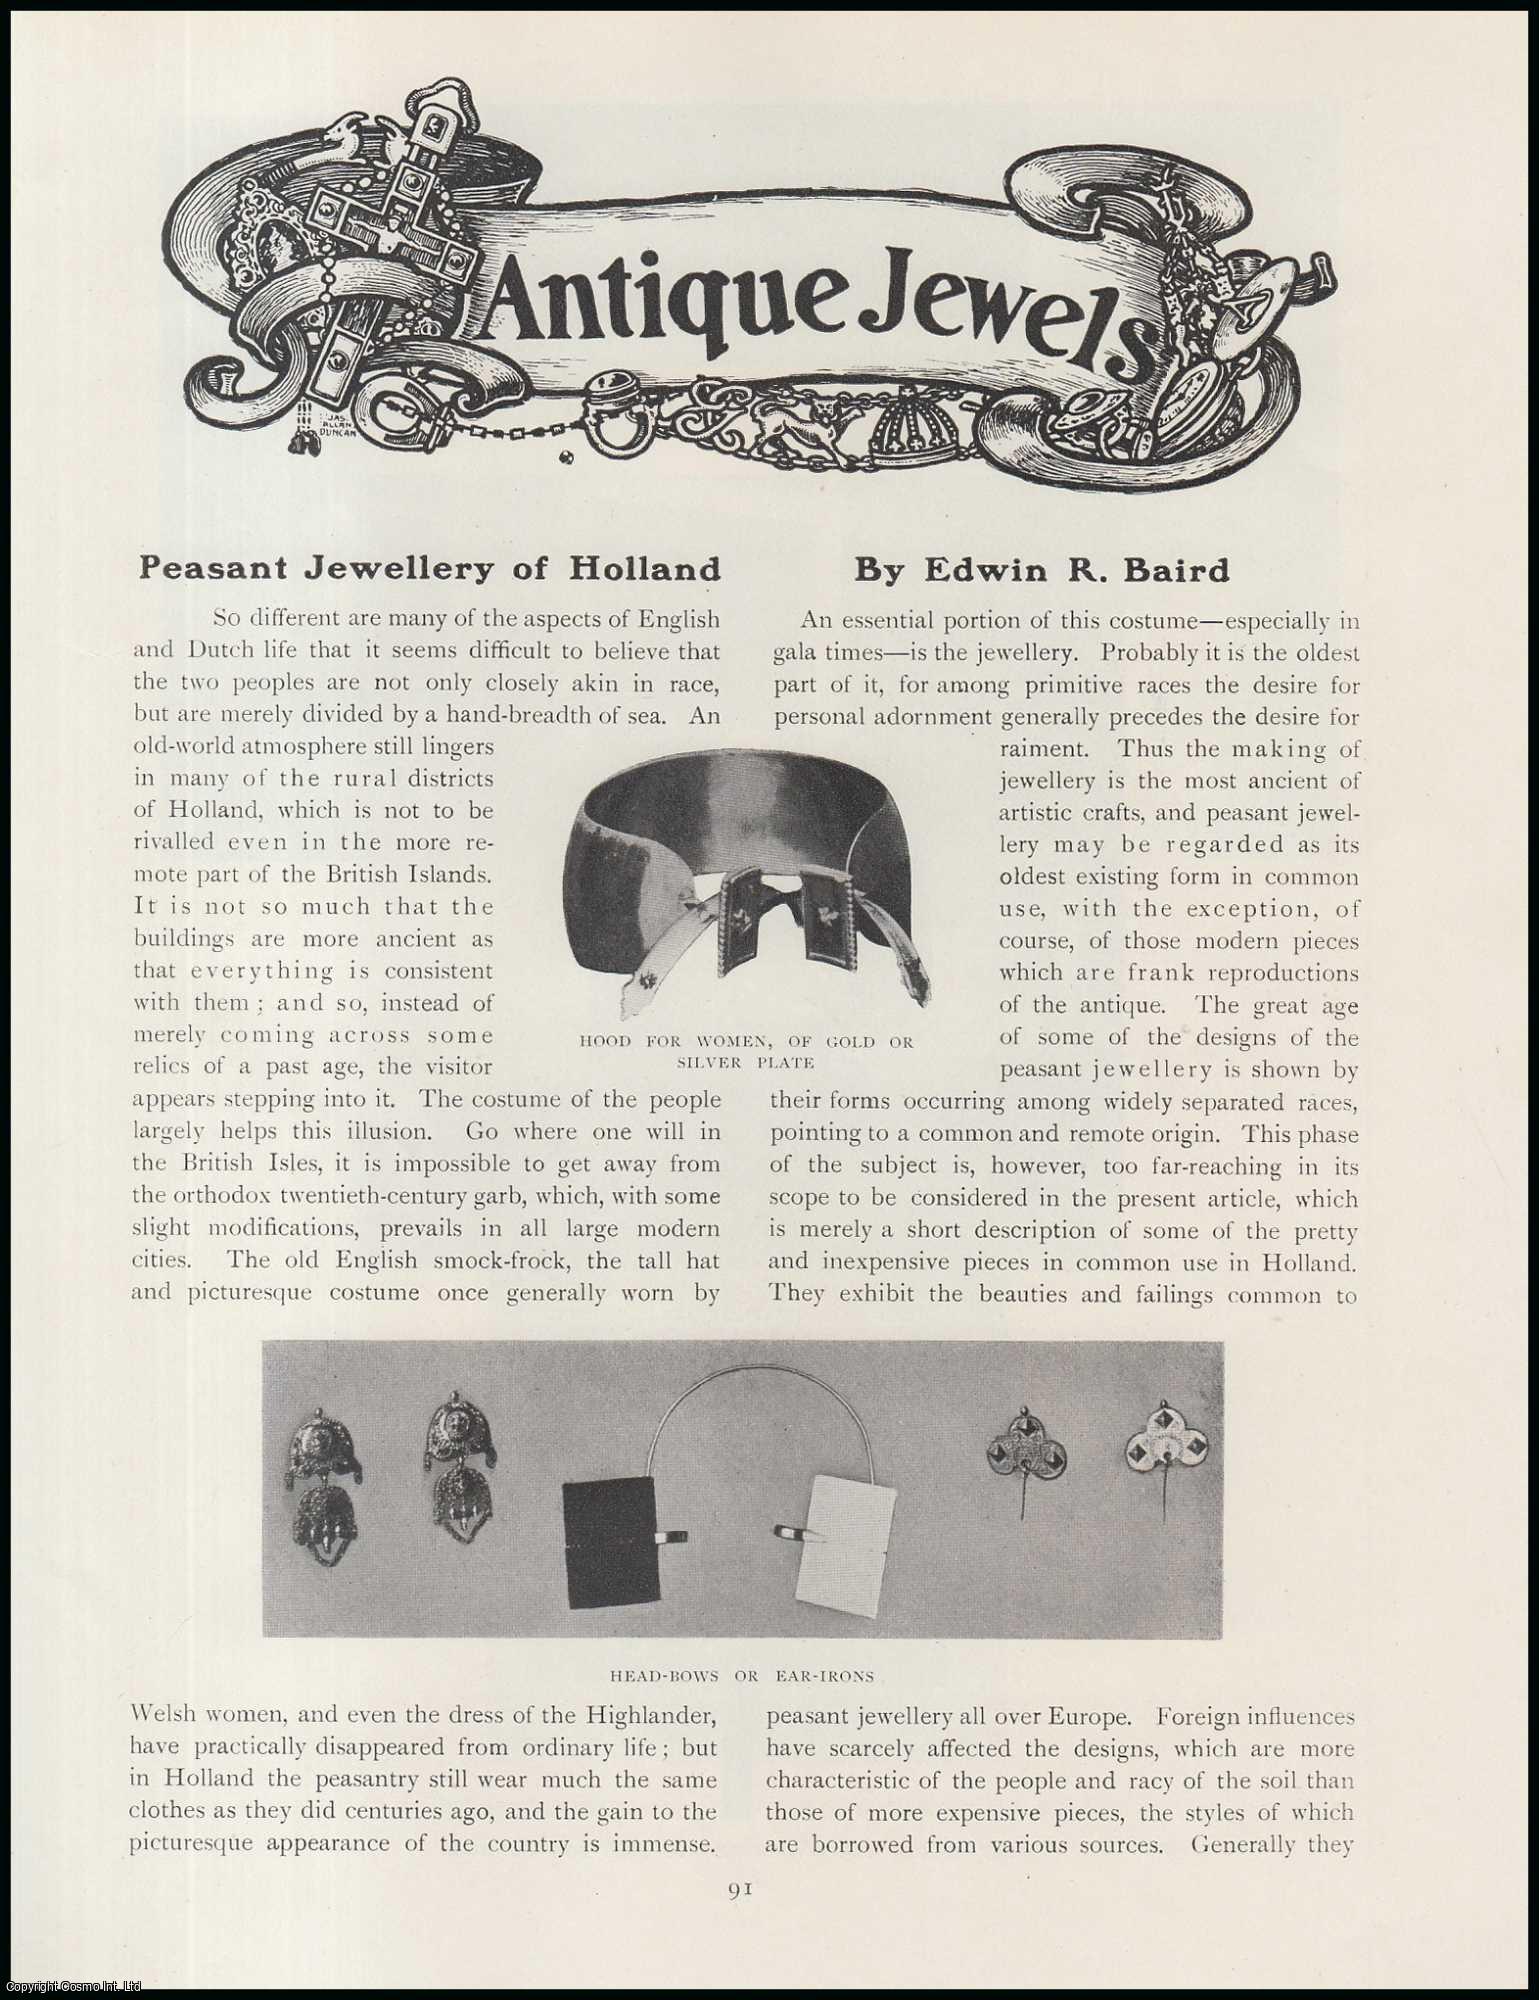 Edwin R. Baird - Peasant Jewellery of Holland. An original article from The Connoisseur, 1915.